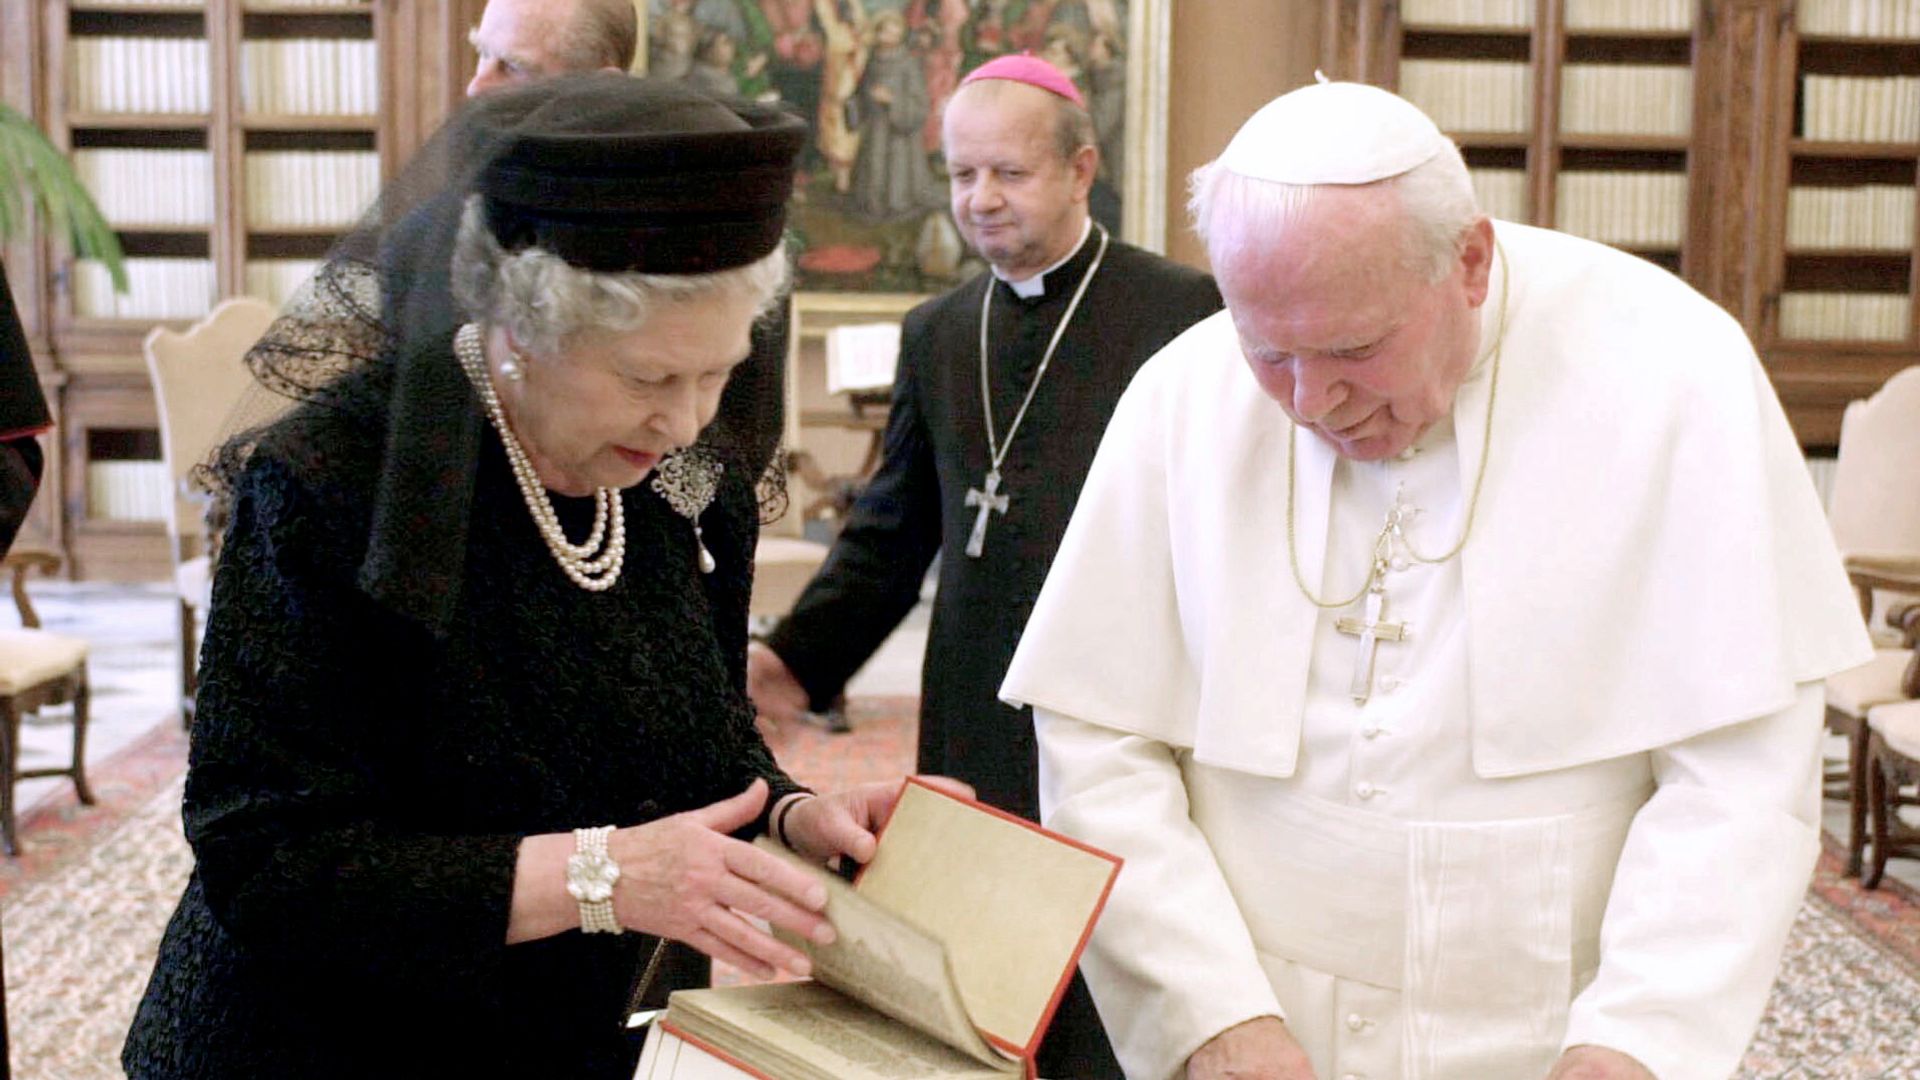 The Queen in an all-black outfit with Pope John Paul II